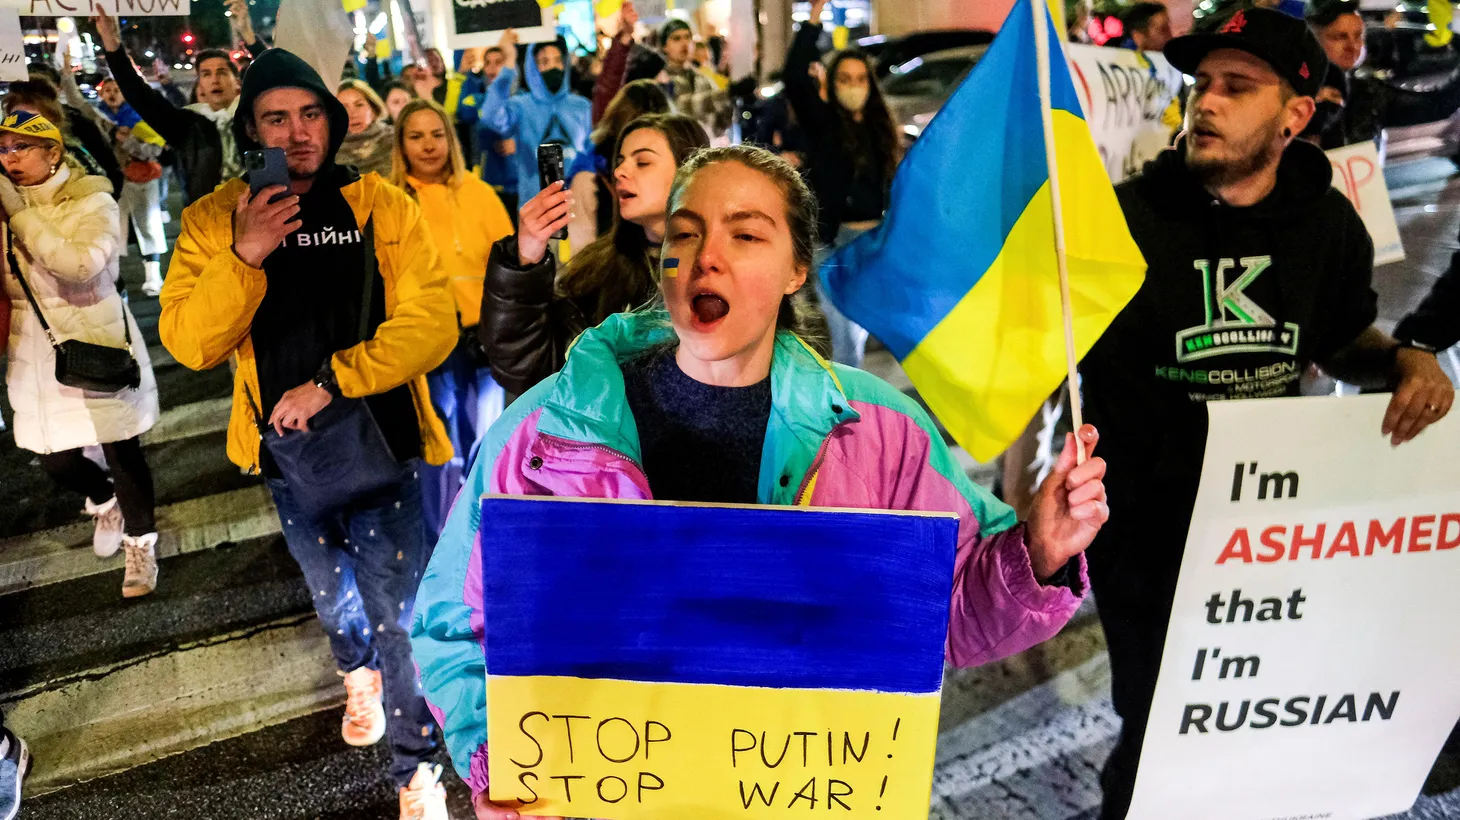 Members of the Russian community march during a demonstration against Russia, after it launched a massive military operation against Ukraine, in Los Angeles, California, U.S., February 24, 2022.